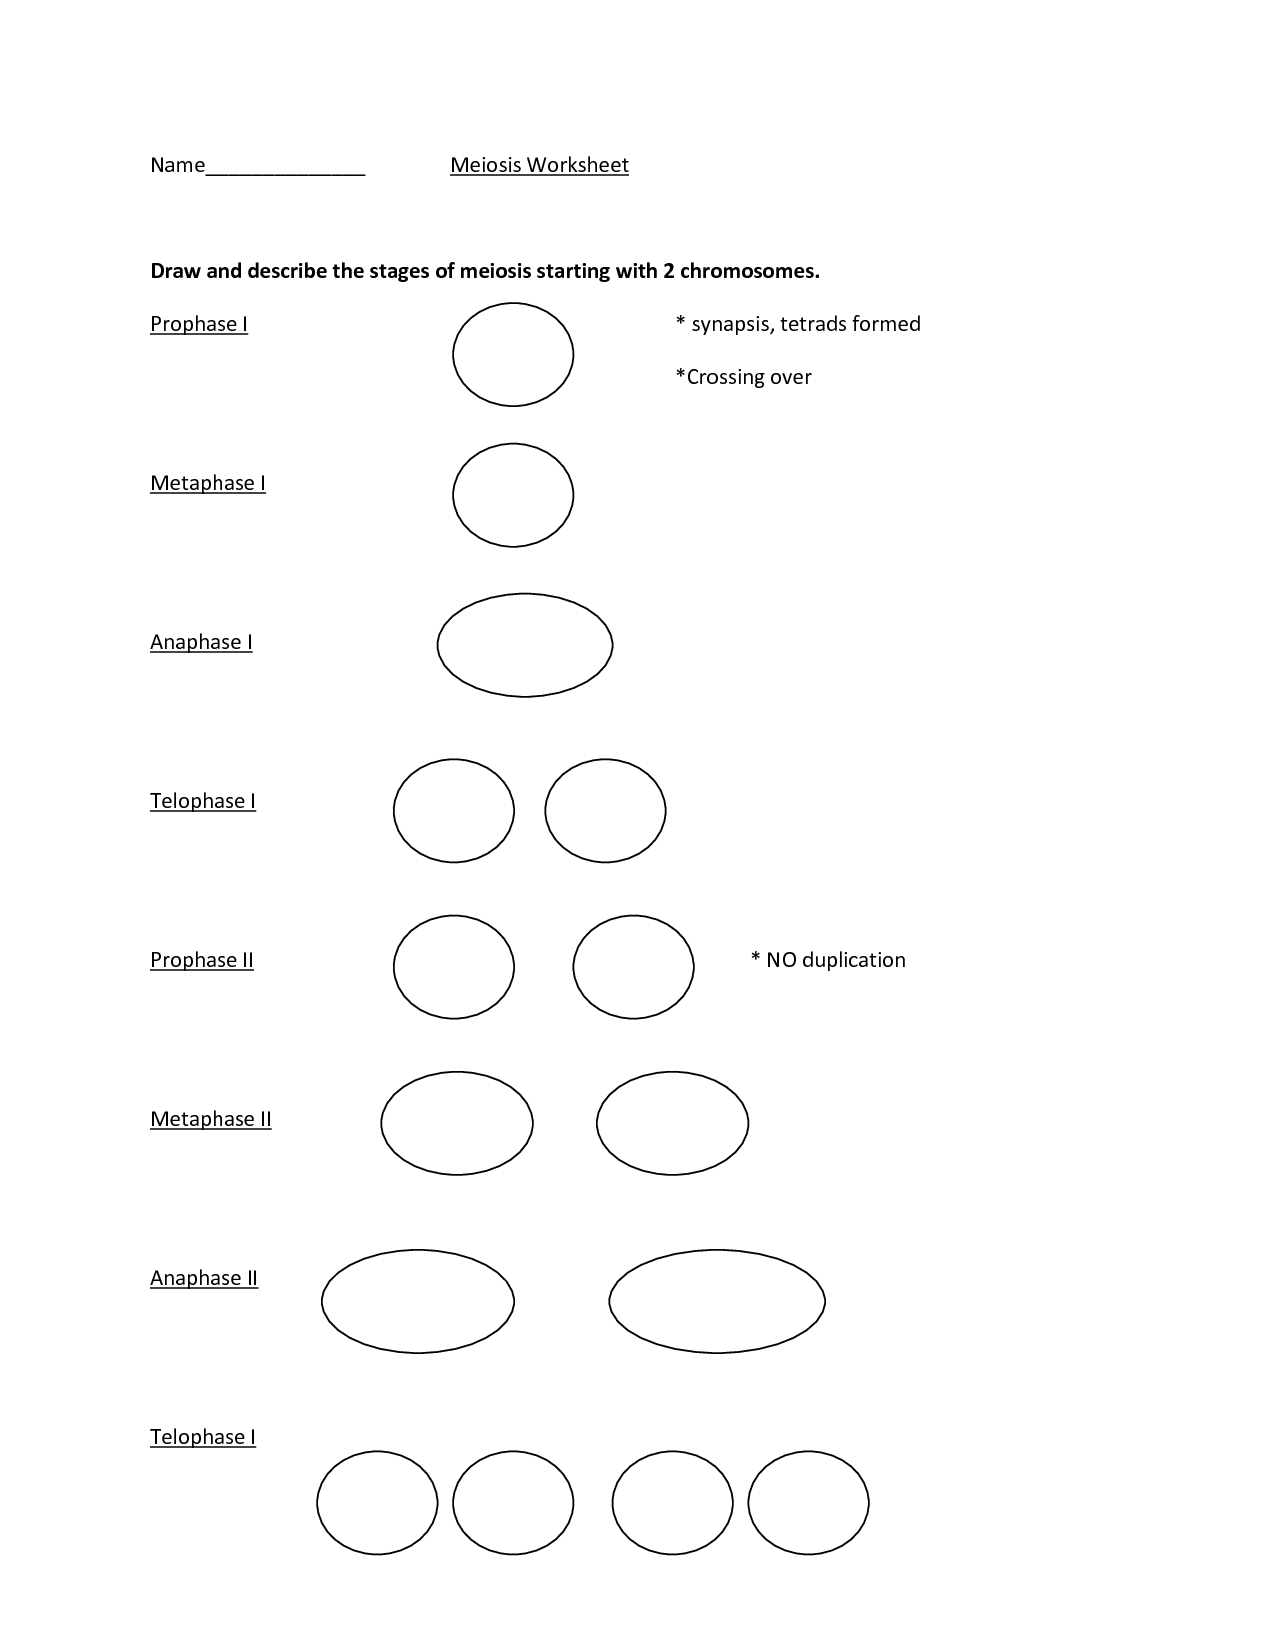 meiosis-stages-worksheet-answers